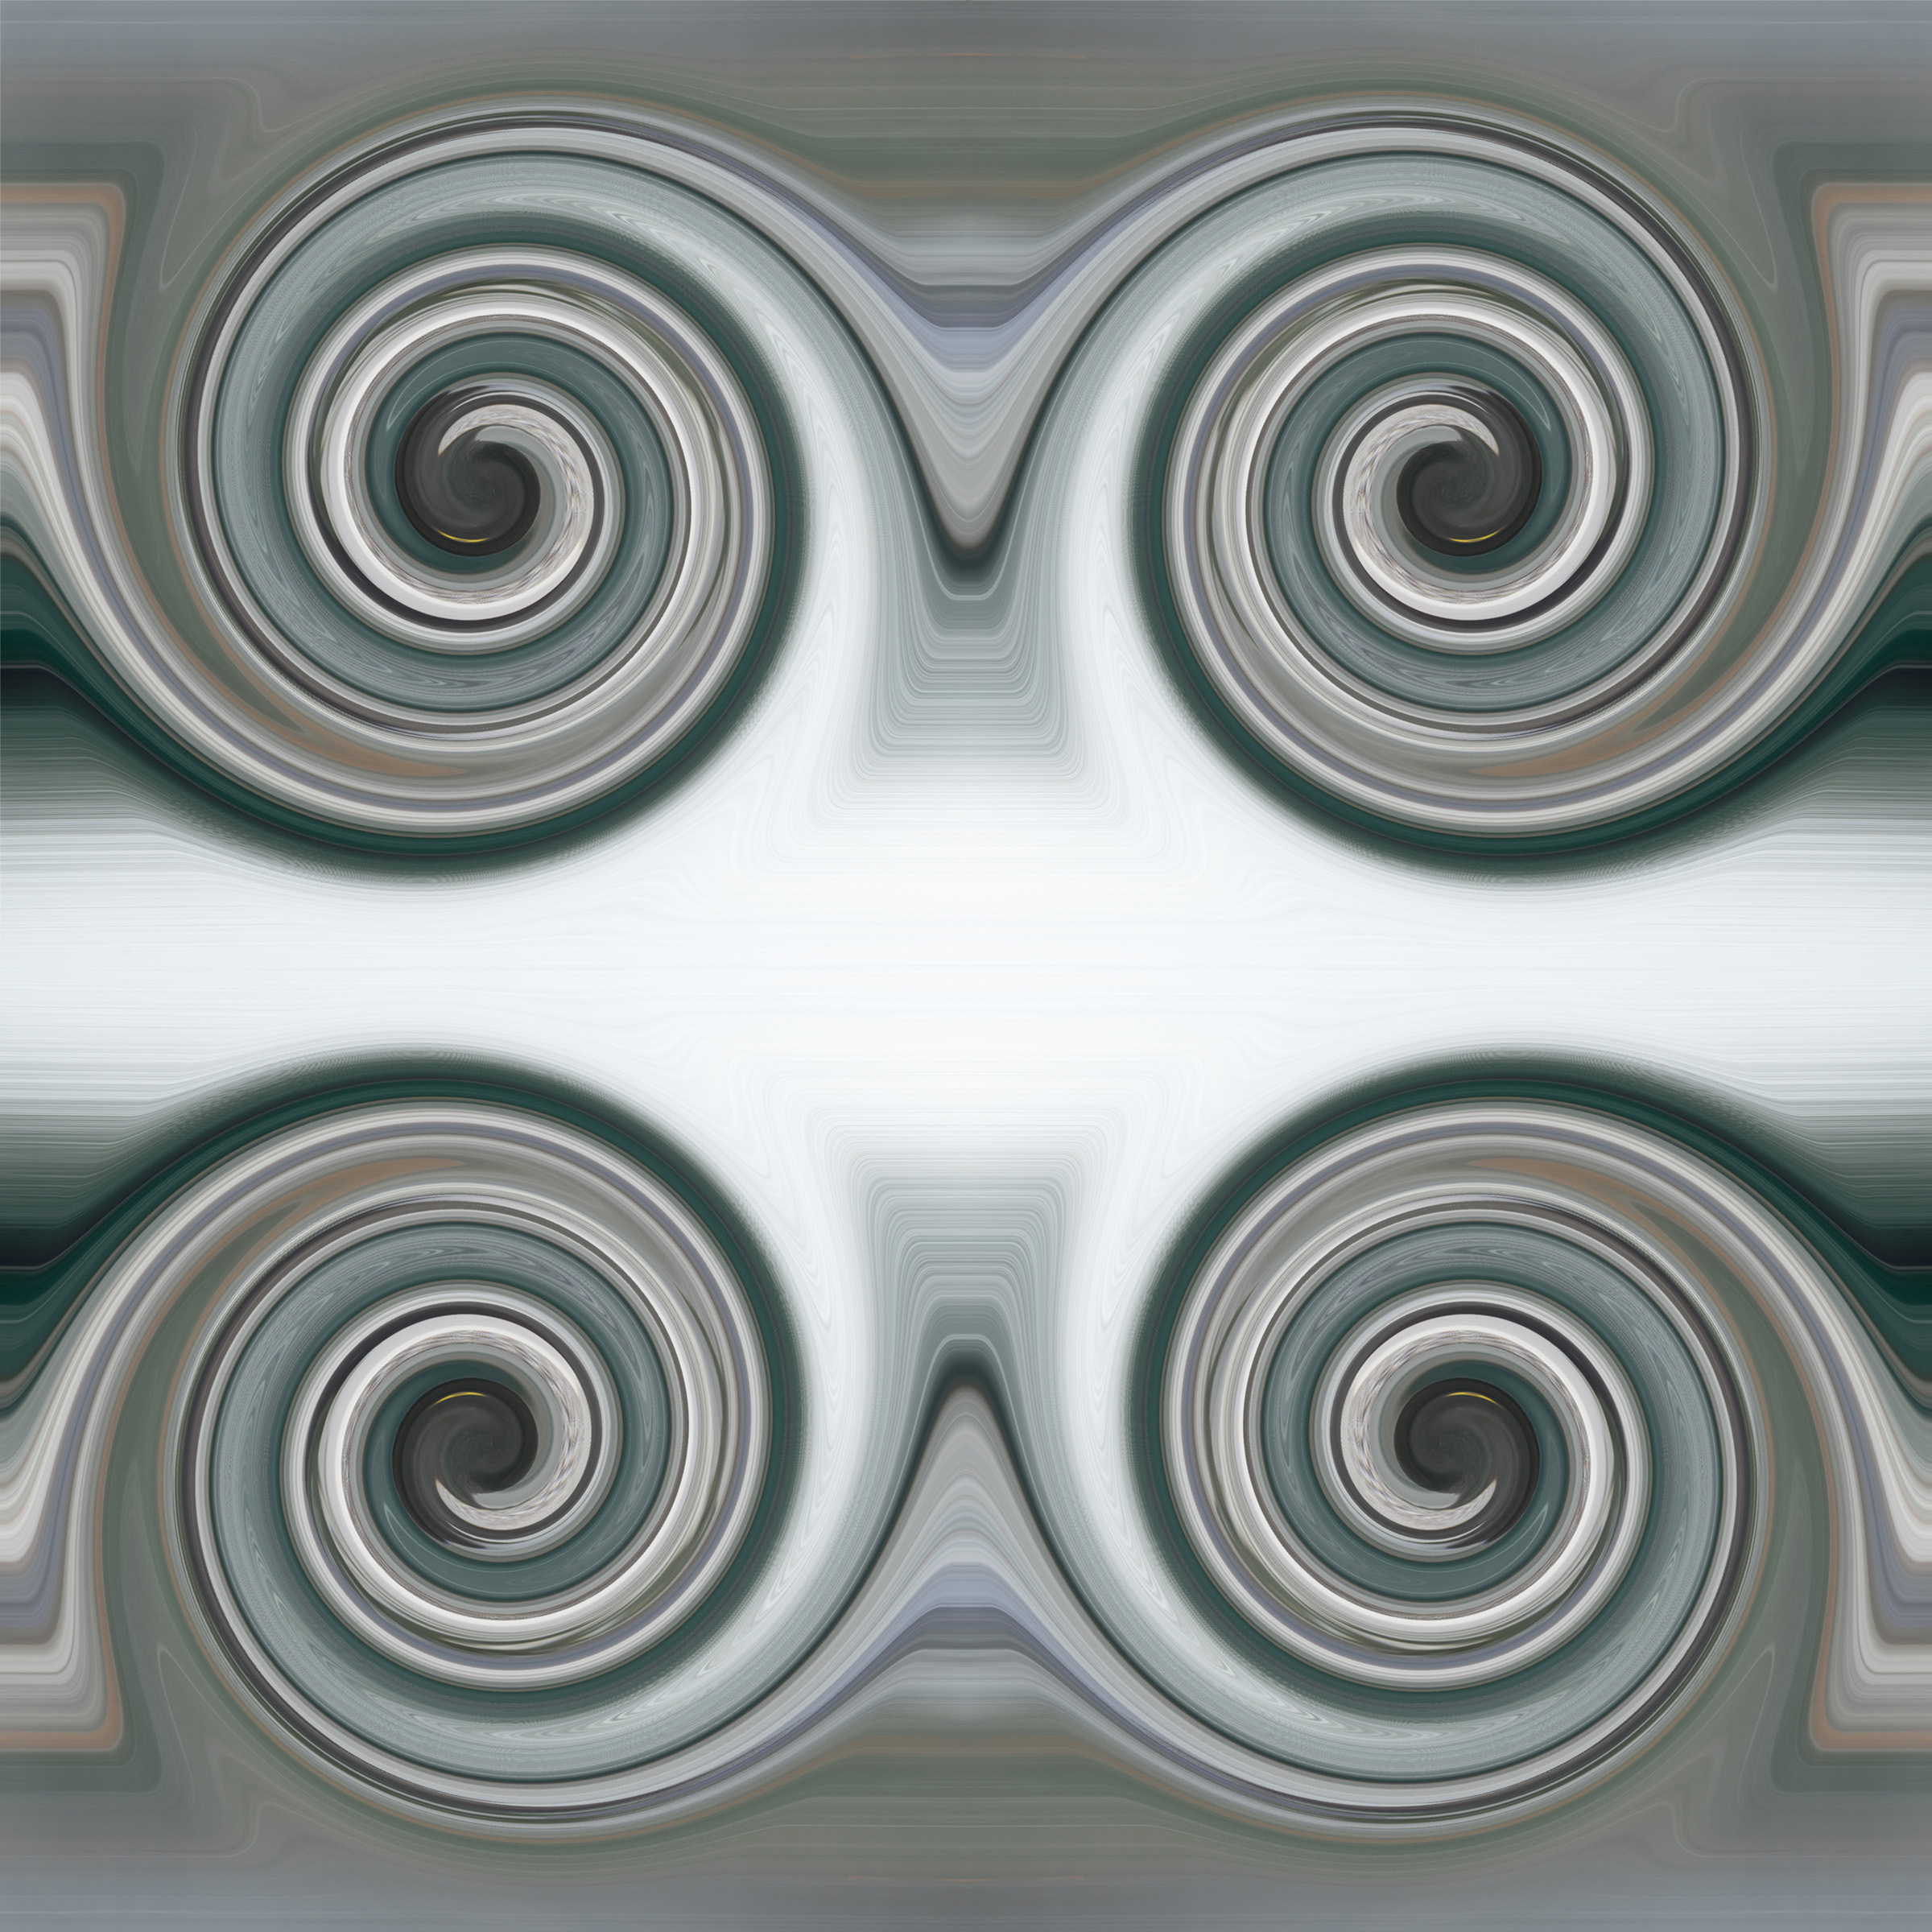 A silver and white abstract image with swirling shapes.